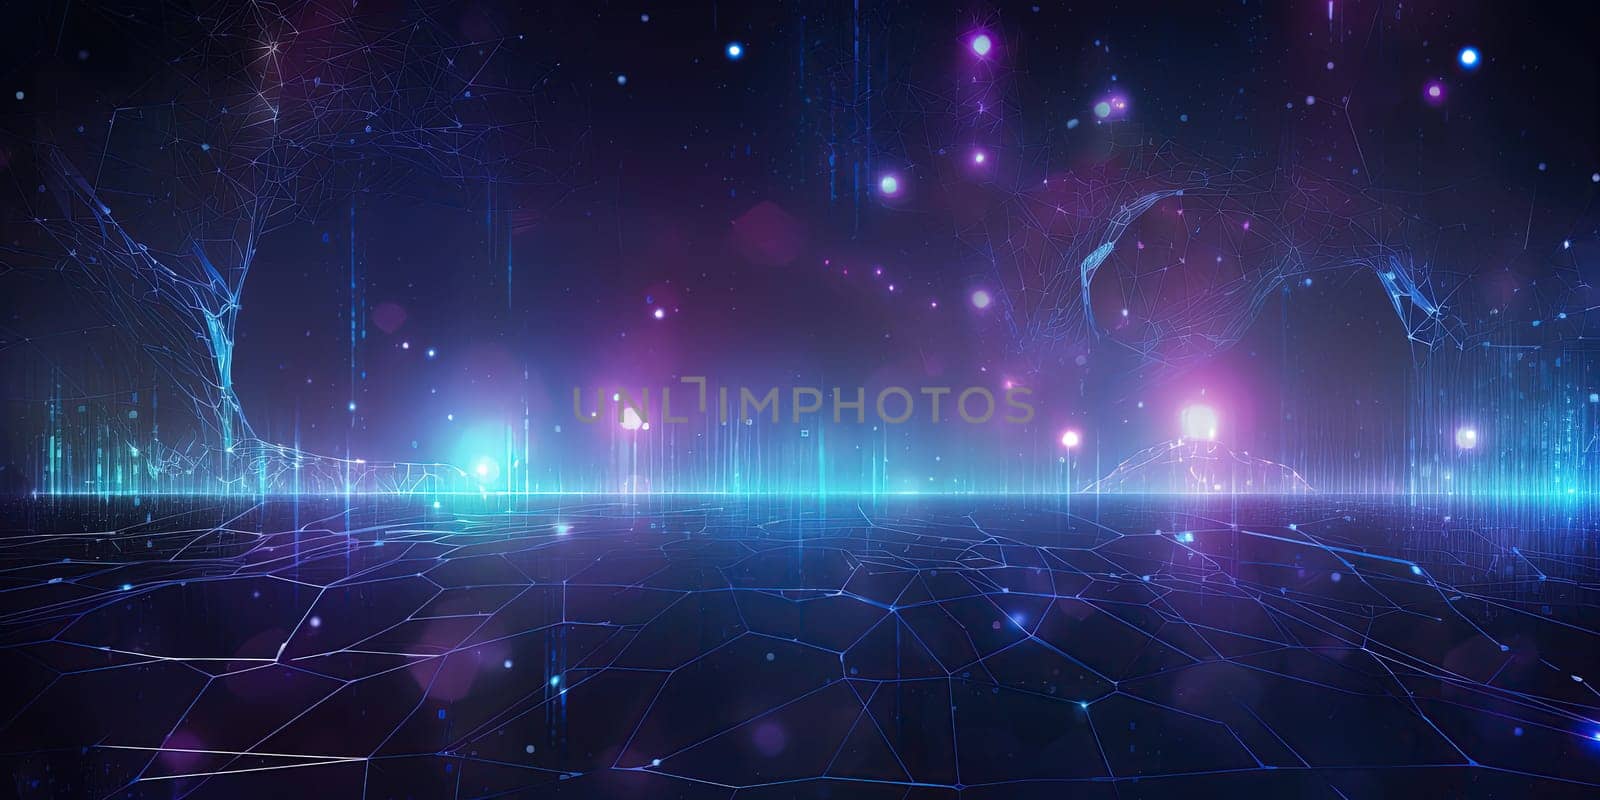 Abstract Background Illustrating Future Internet And Telecommunication World by GekaSkr